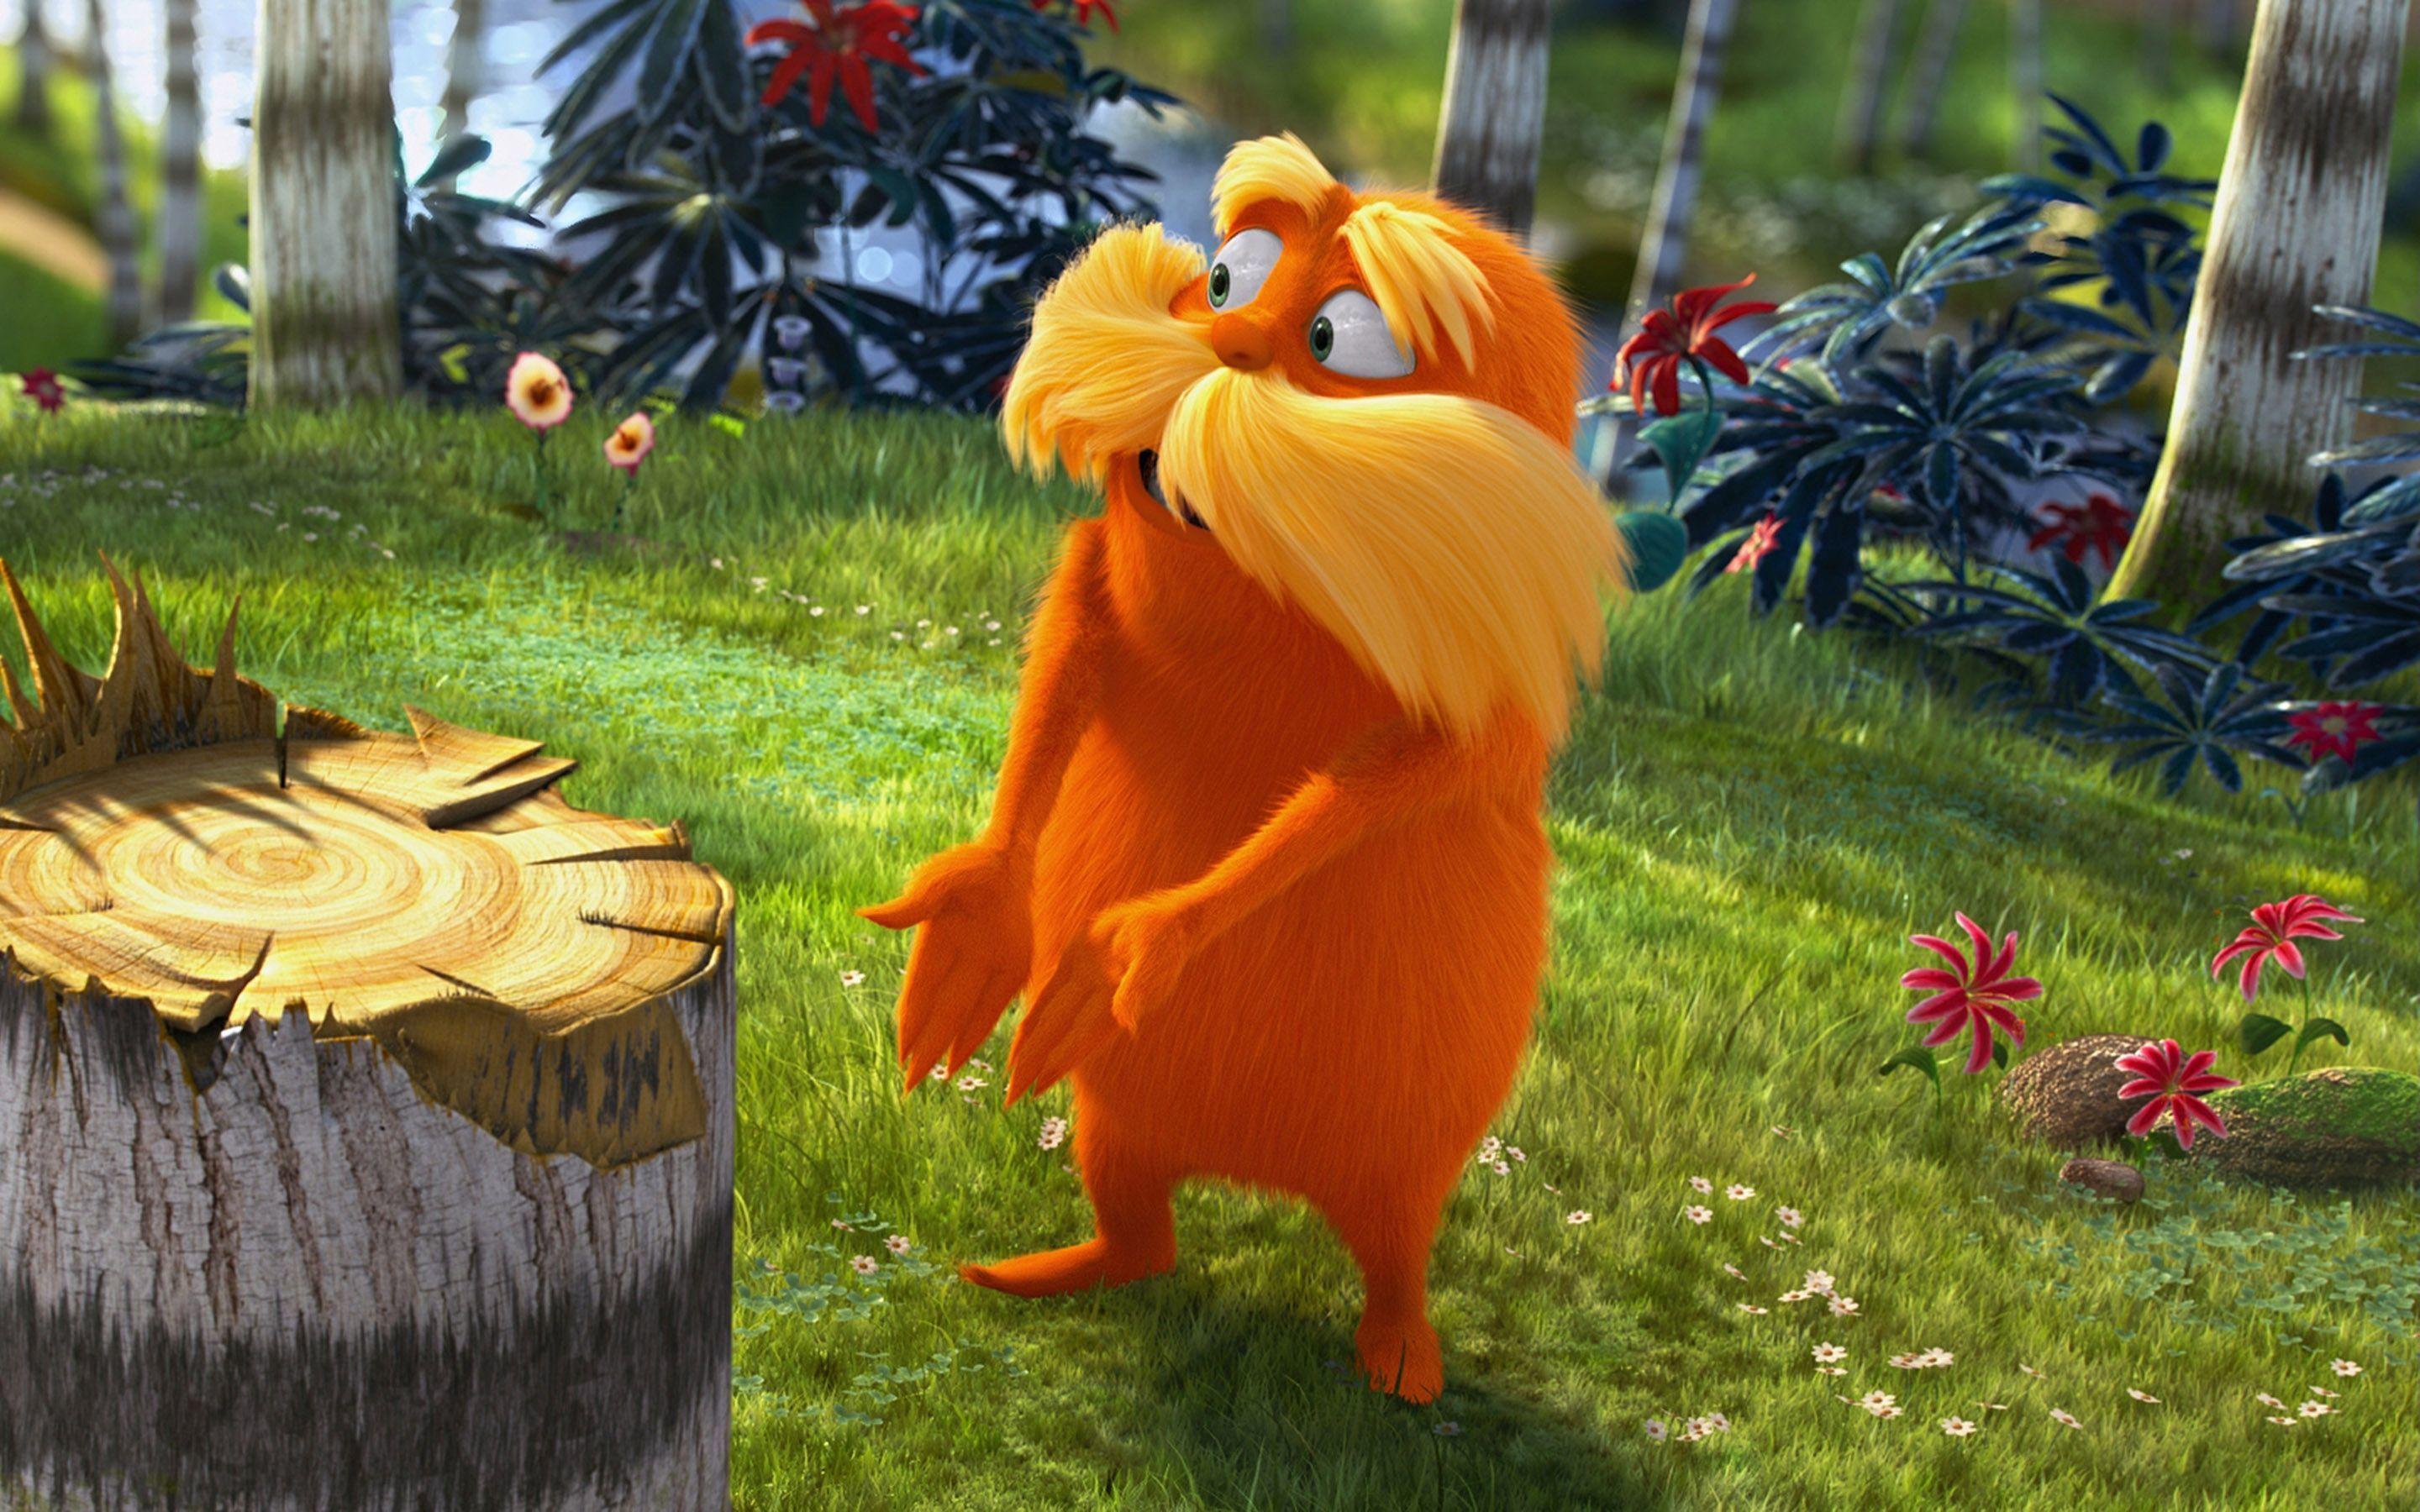 The Lorax Background